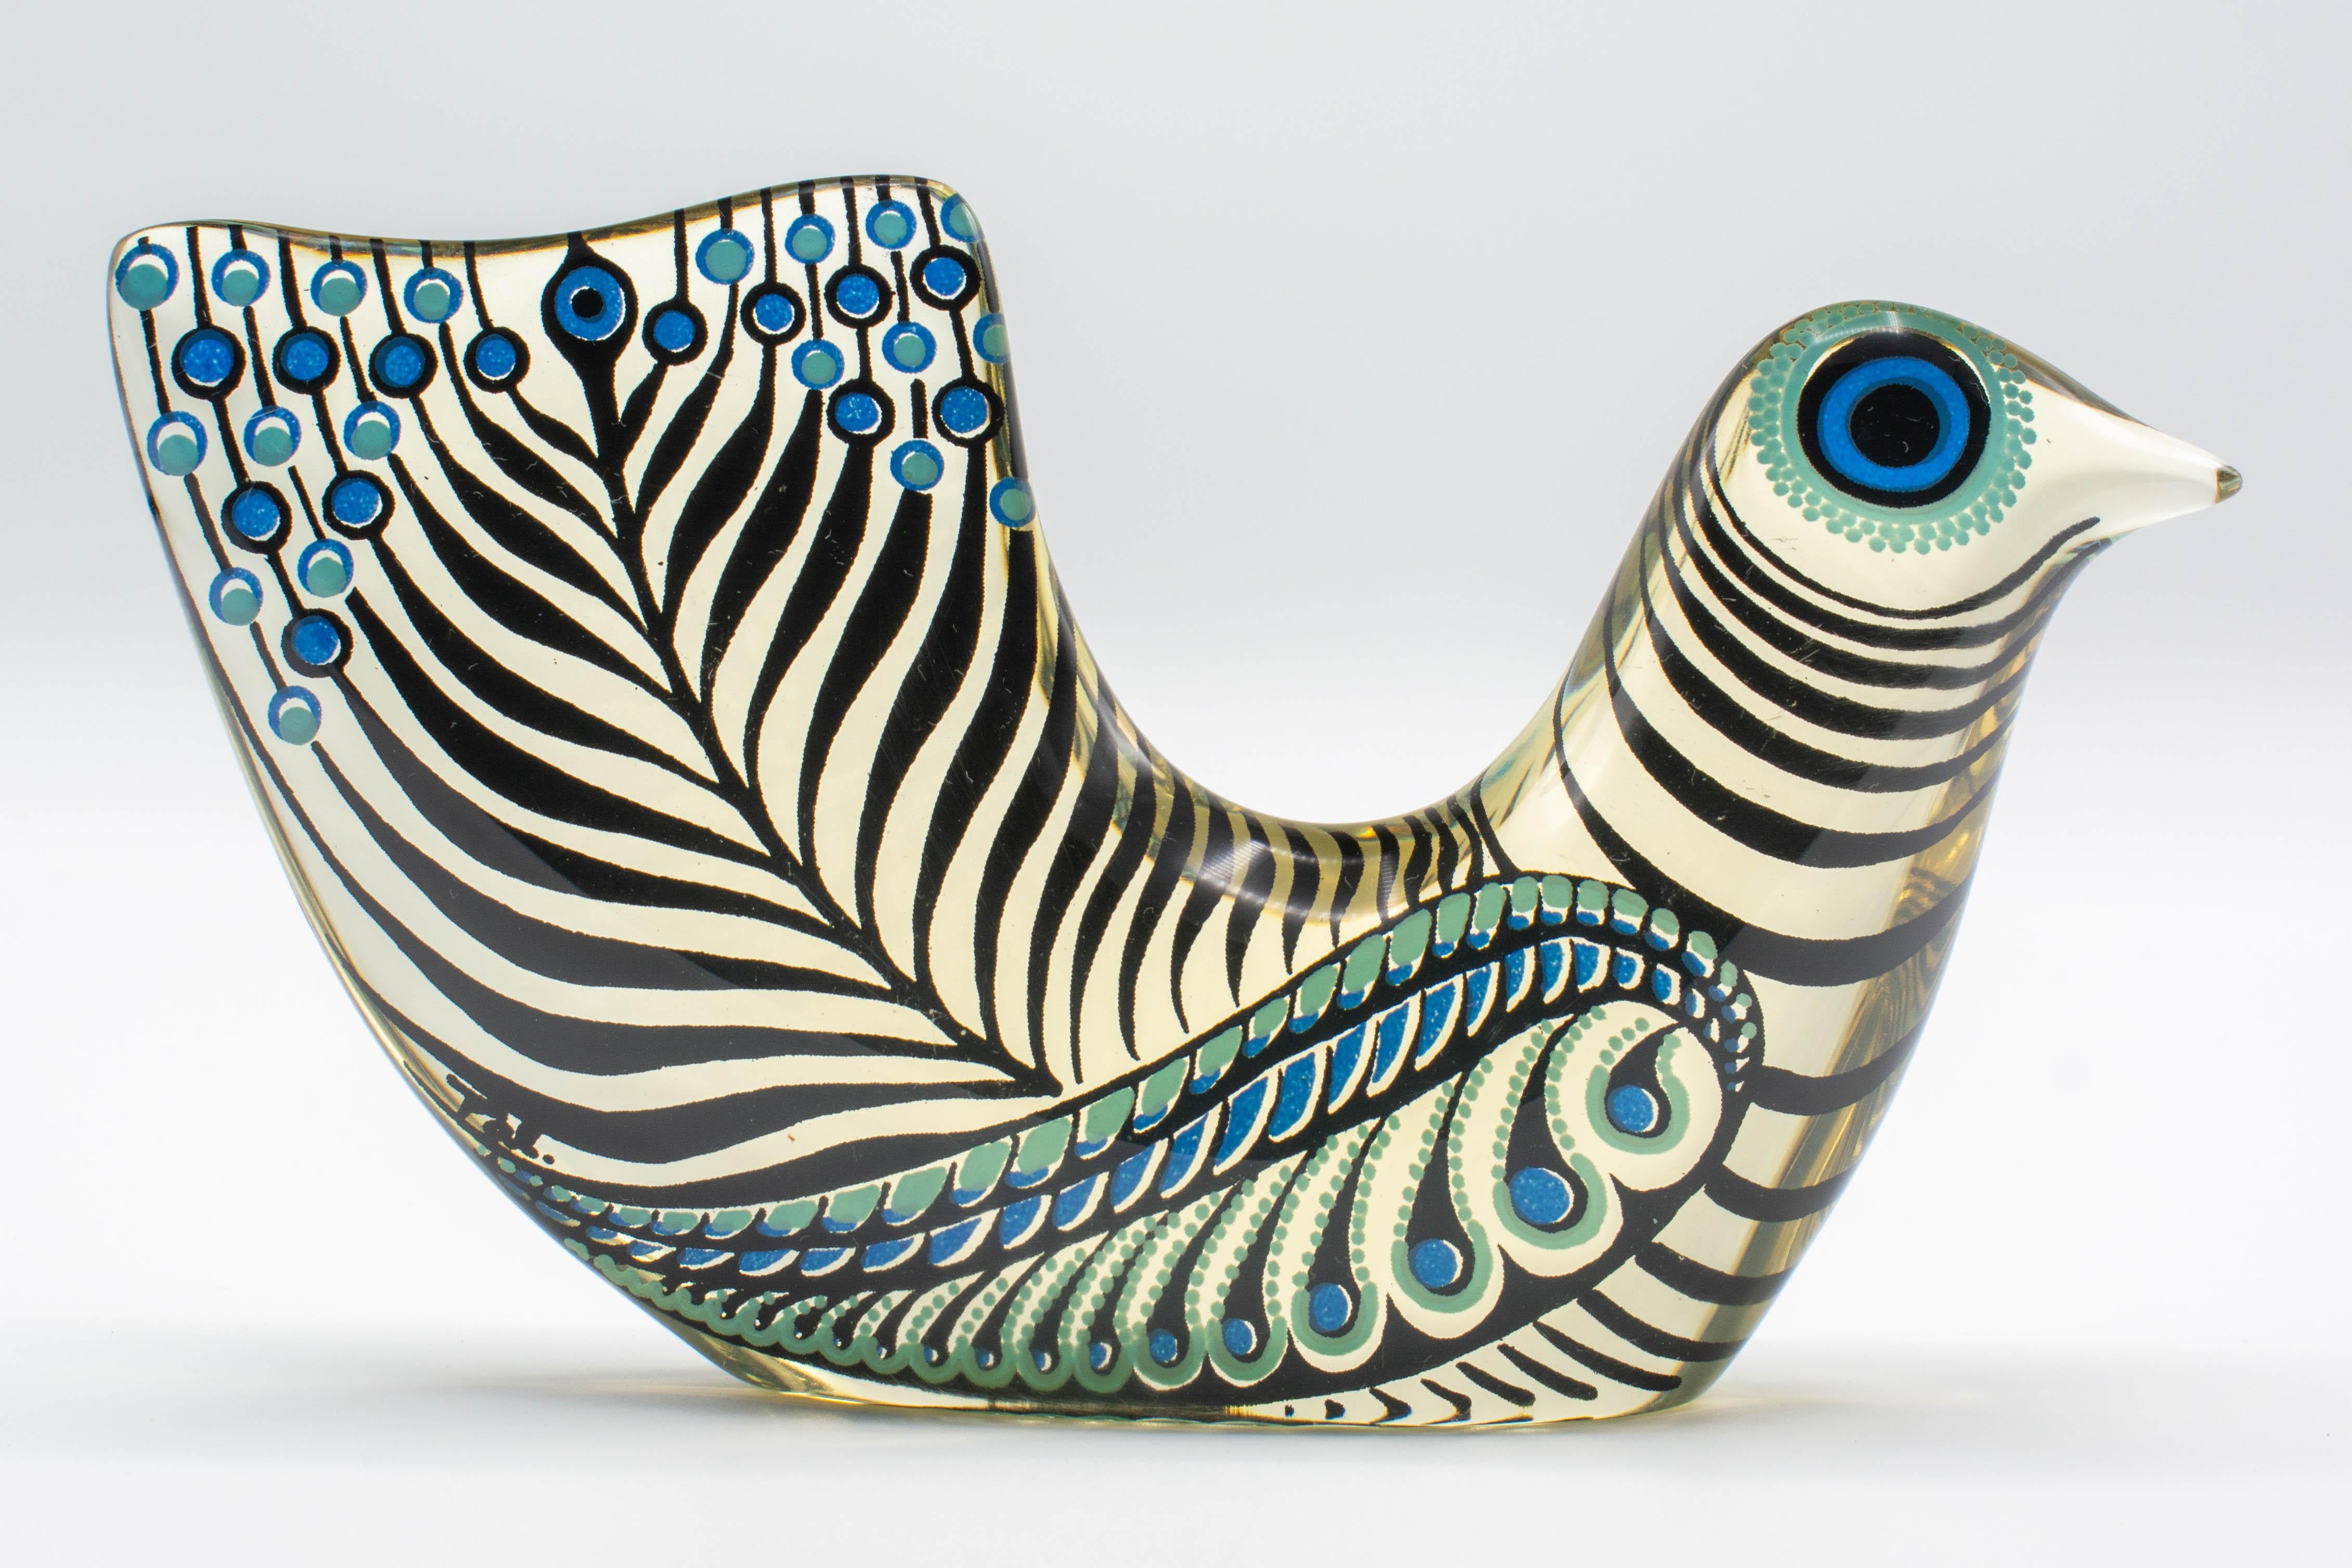 A Mid-Century Modern Lucite Op Art blue, turquoise and black bird designed by Abraham Palatnik. Abraham Palatnik (born in 1928) is a Brazilian artist and inventor whose innovations include kinechromatic art. Part of the Artemis Collection that